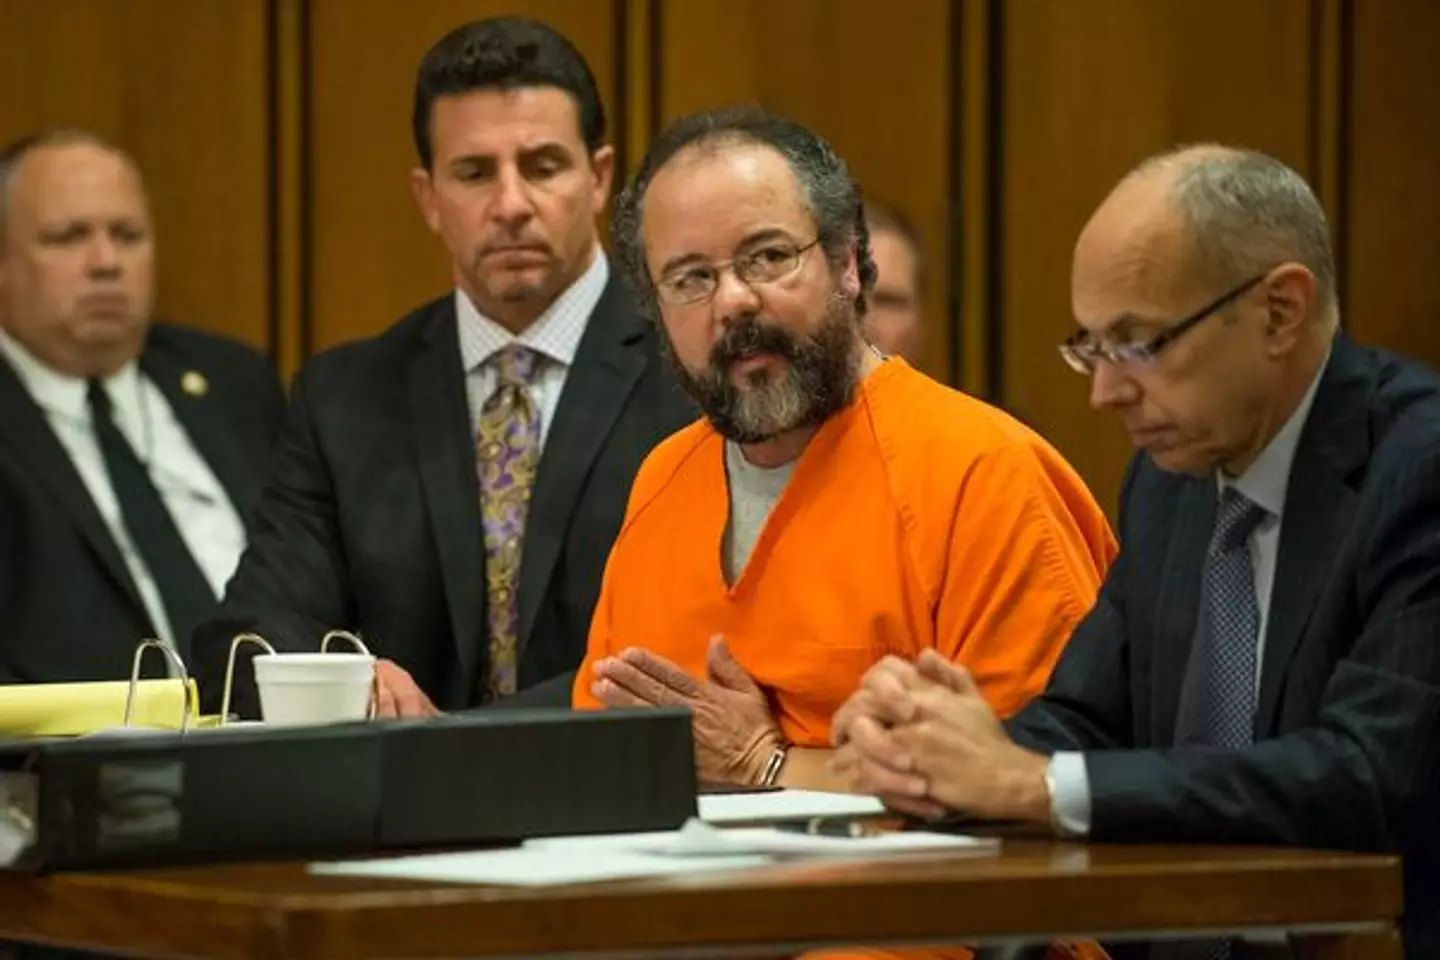 Ariel Castro at his trial in 2013. Angelo Merendino/Getty Images